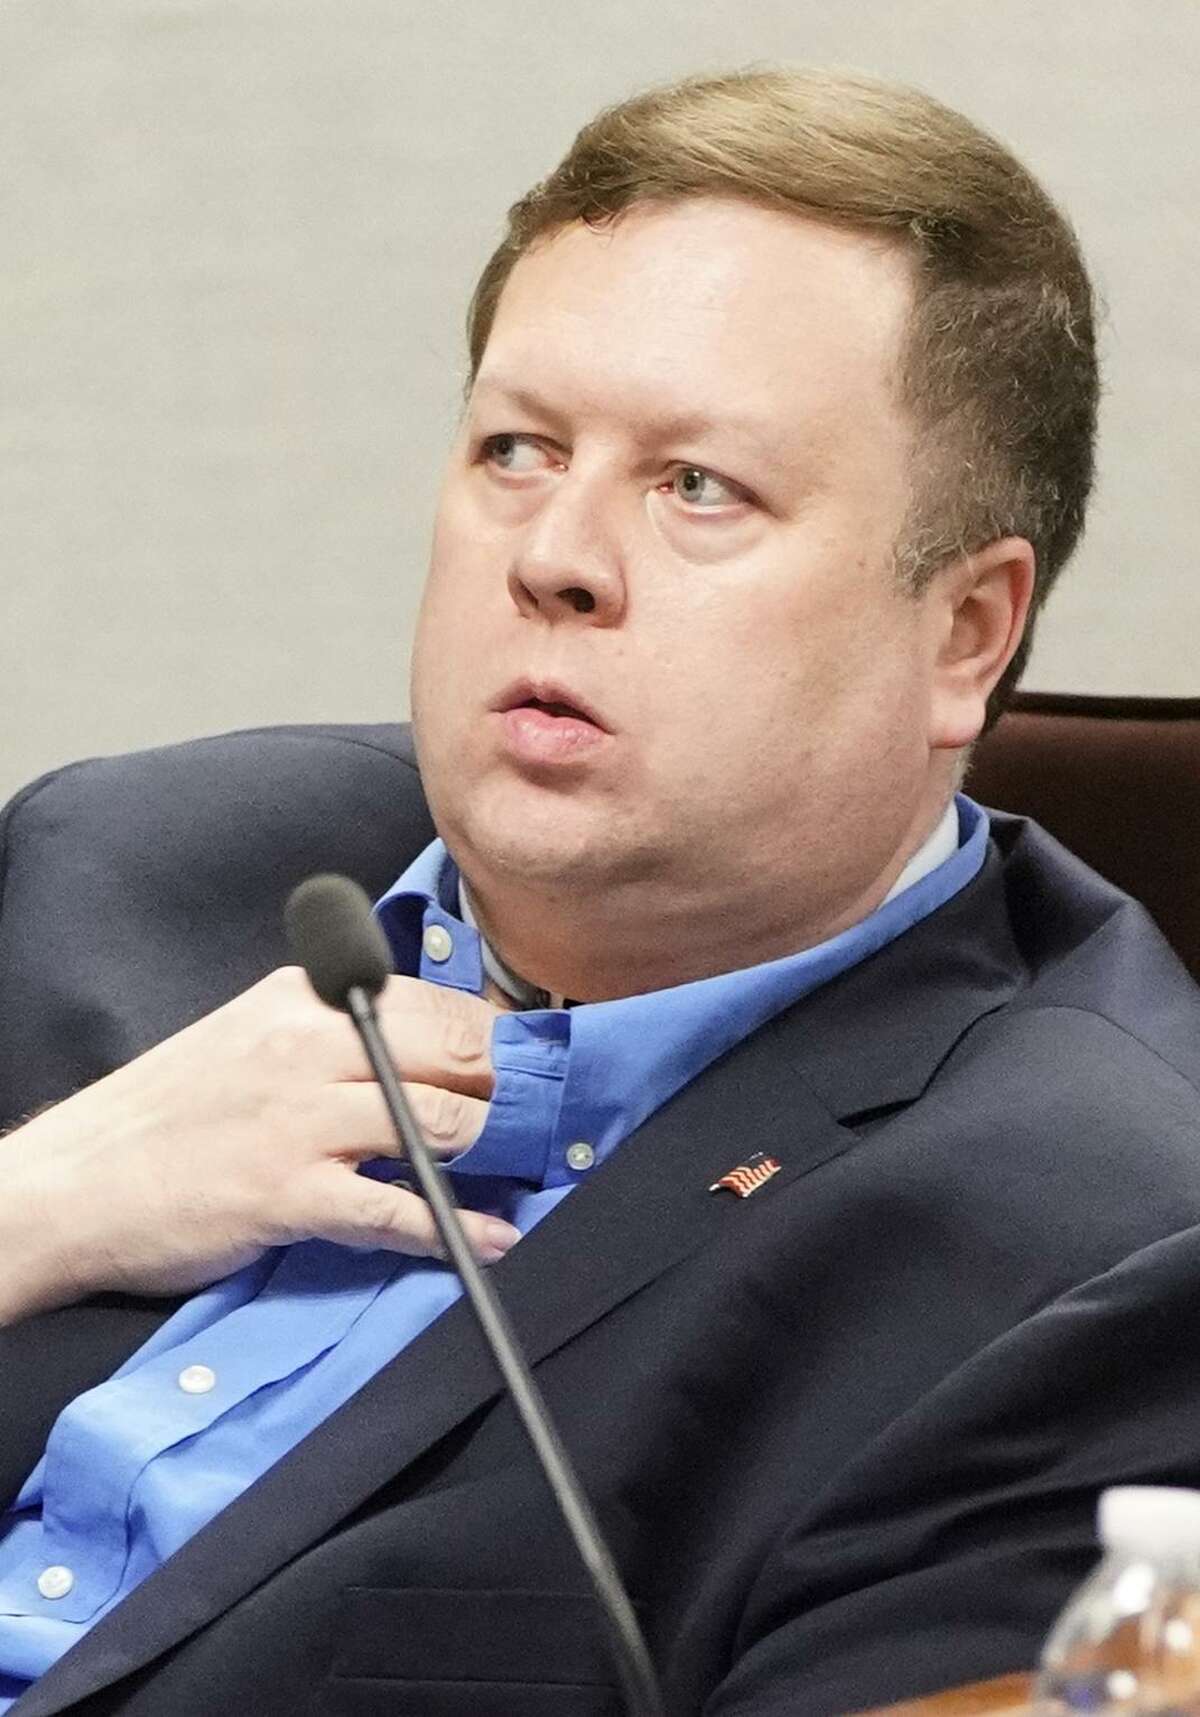 Board member Mike Wolfe is shown during the Harris County Dept. of Education board meeting Wednesday, Feb. 27, 2019, in Houston.